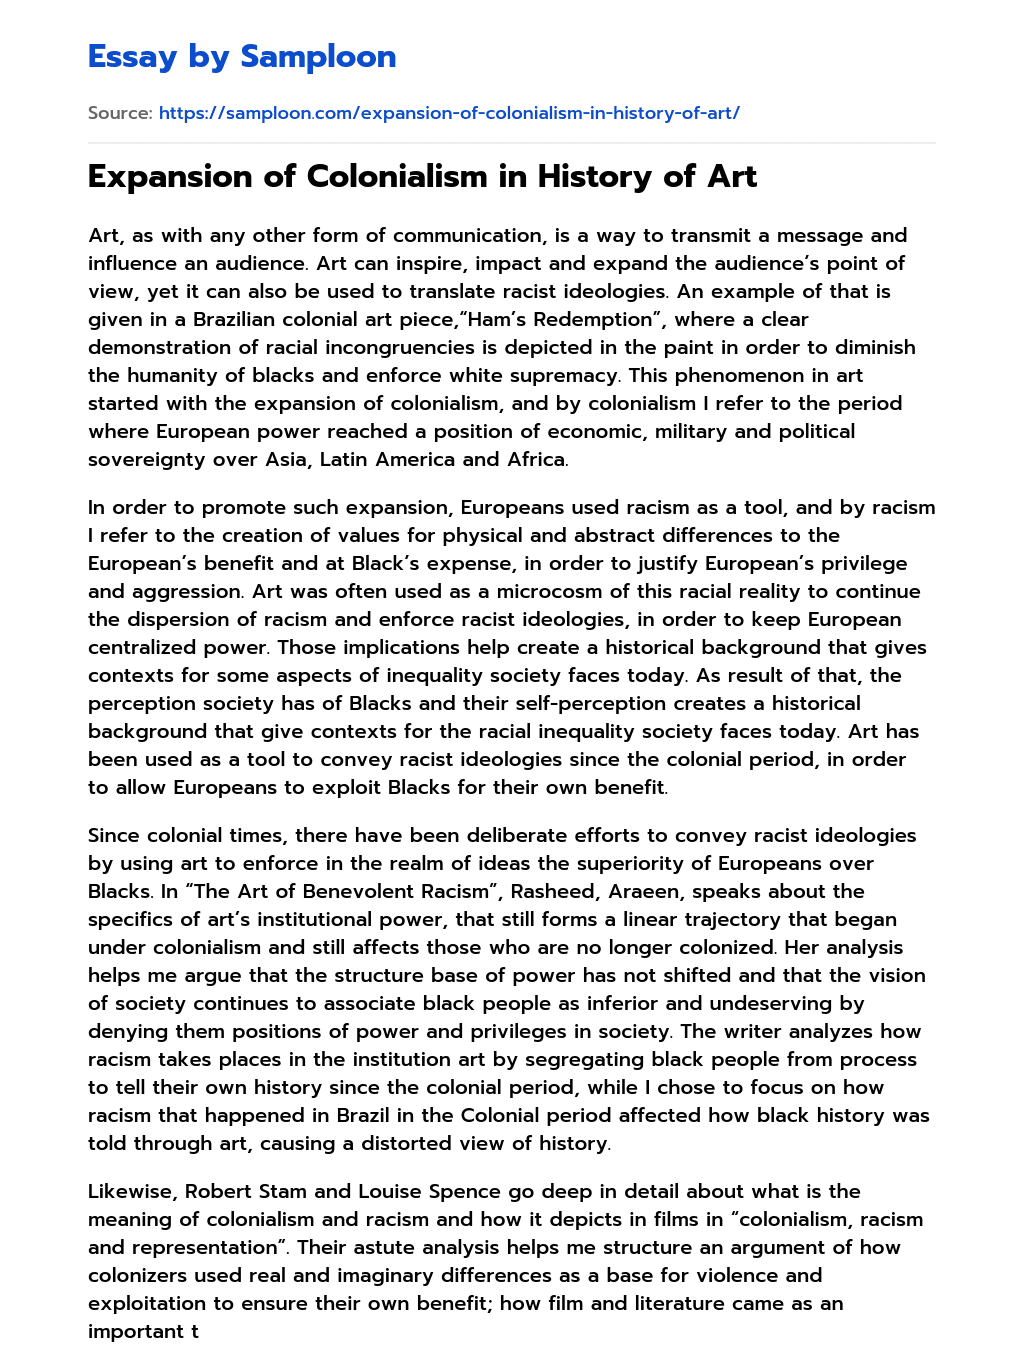 Expansion of Colonialism in History of Art essay